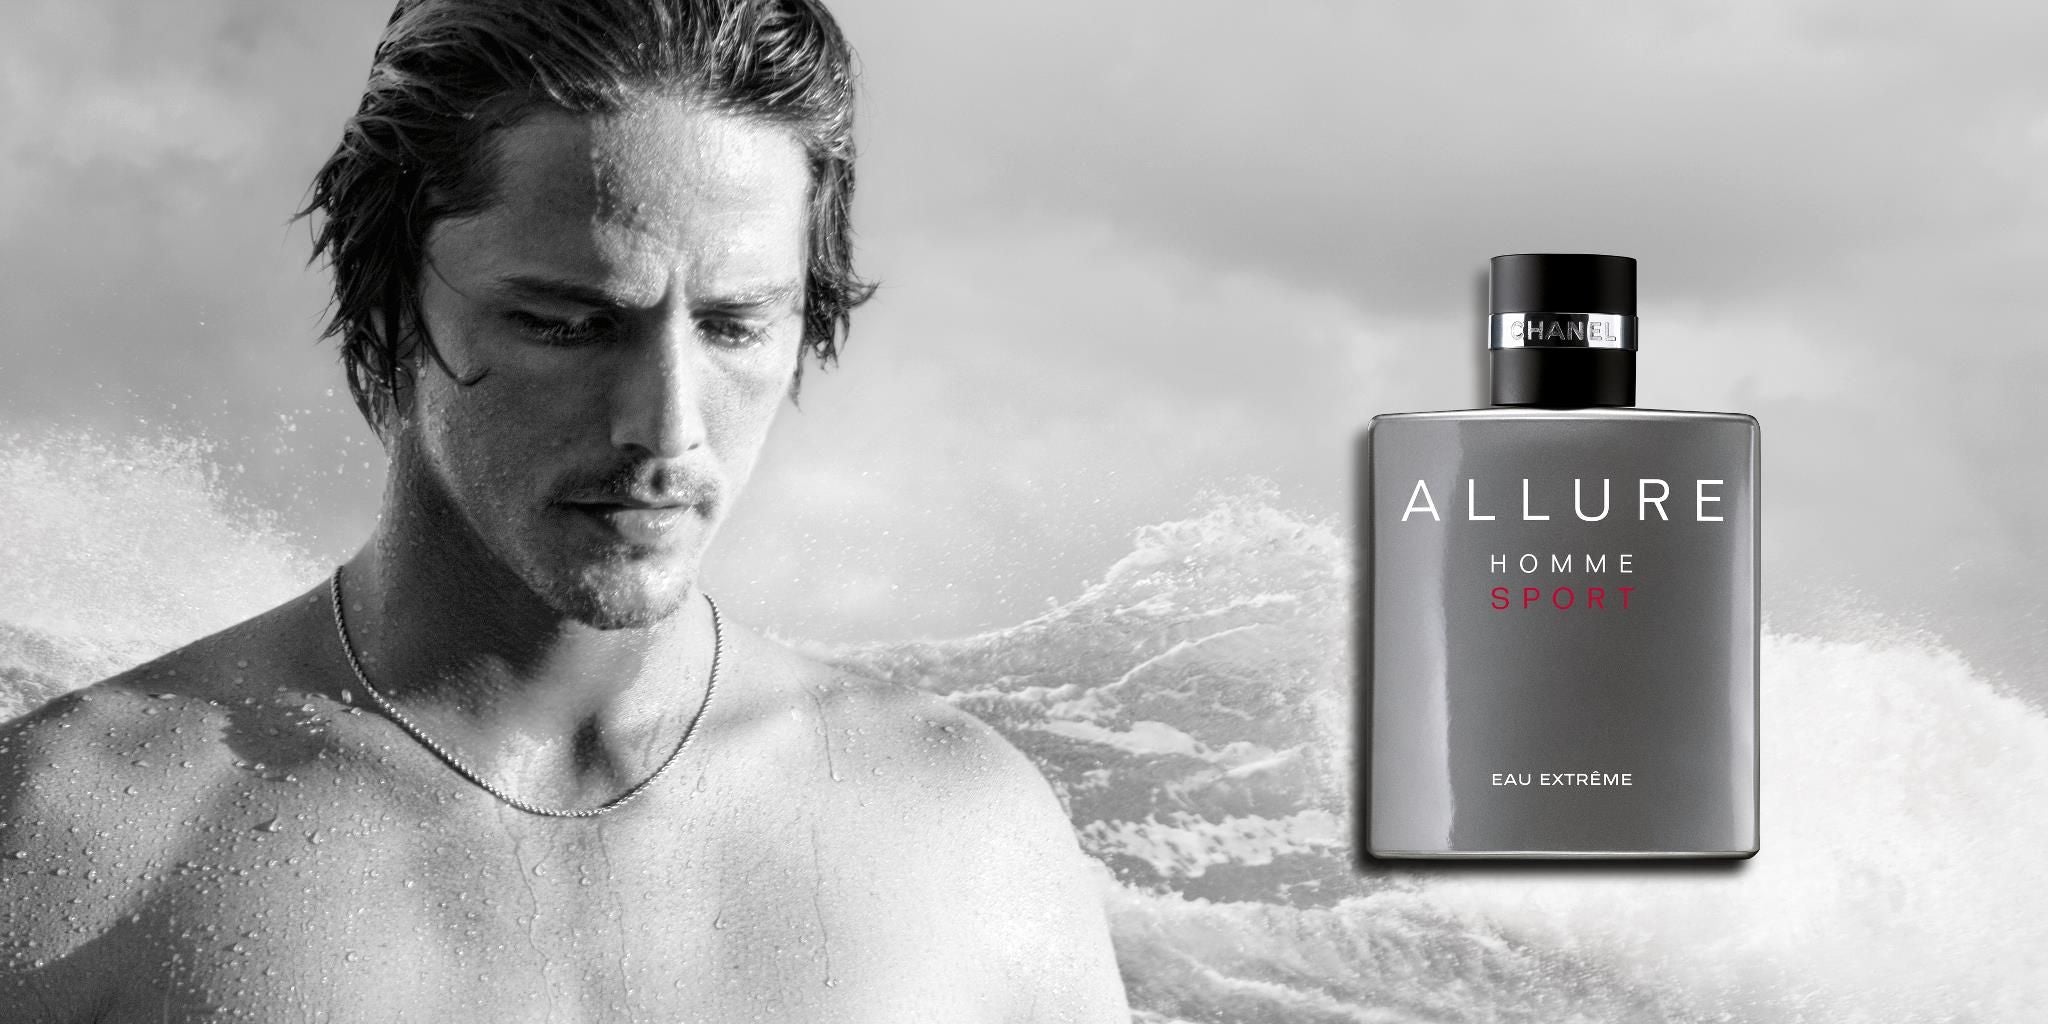 CHANEL ALLURE HOMME SPORTS EAU EXTREME 100 ML – THE LUSH LUXURY